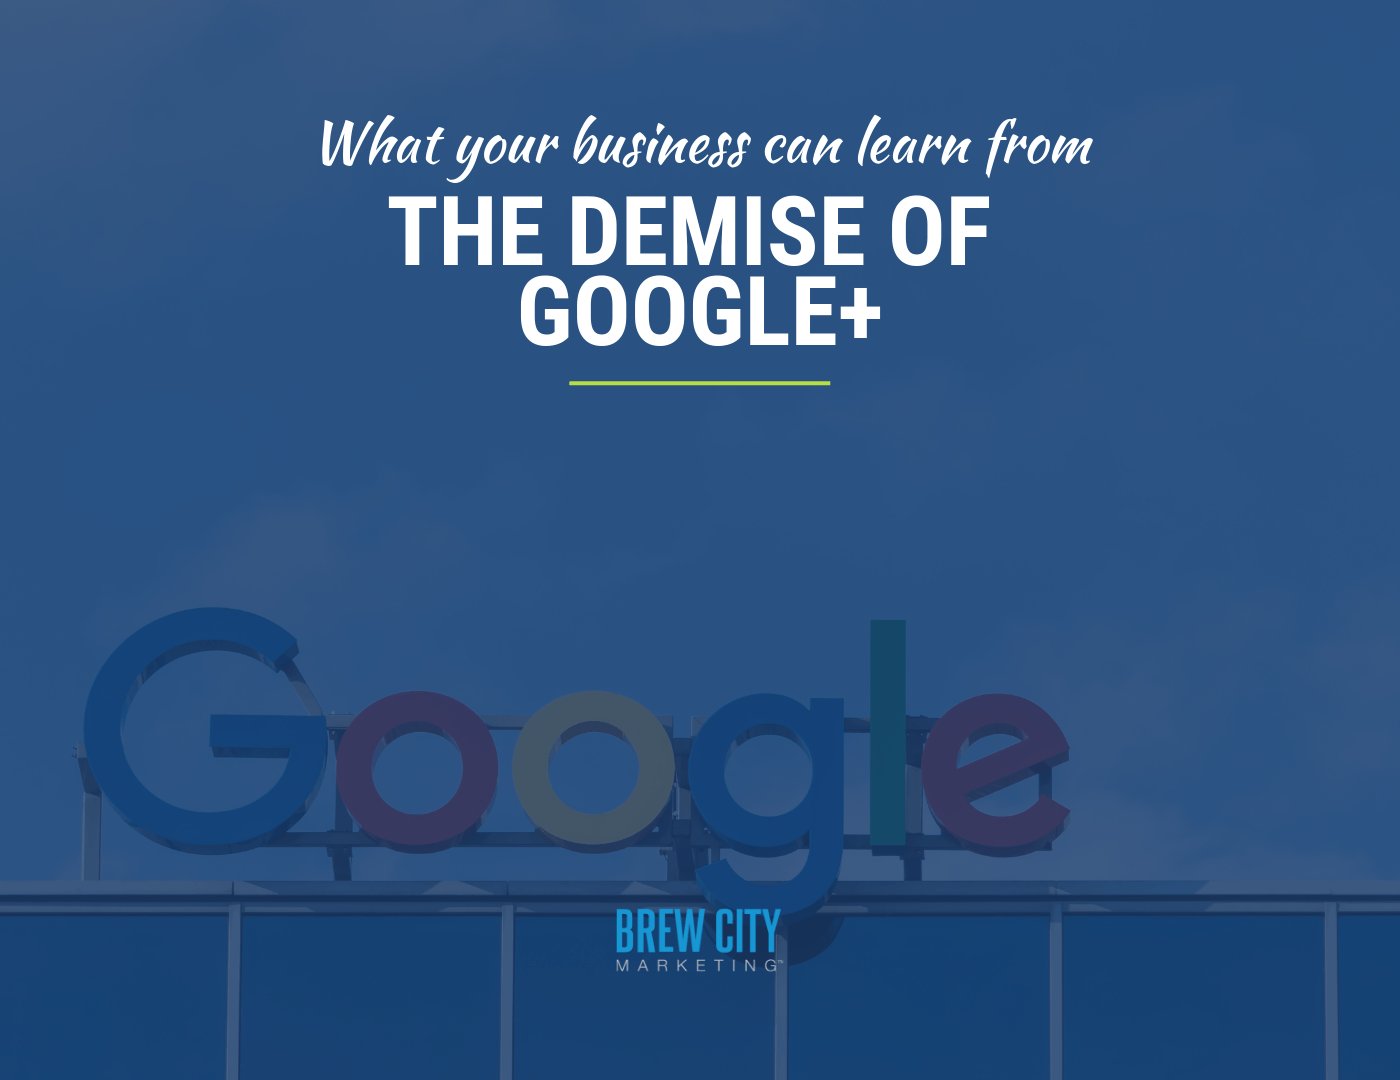 what your business can learn from the demise of google+